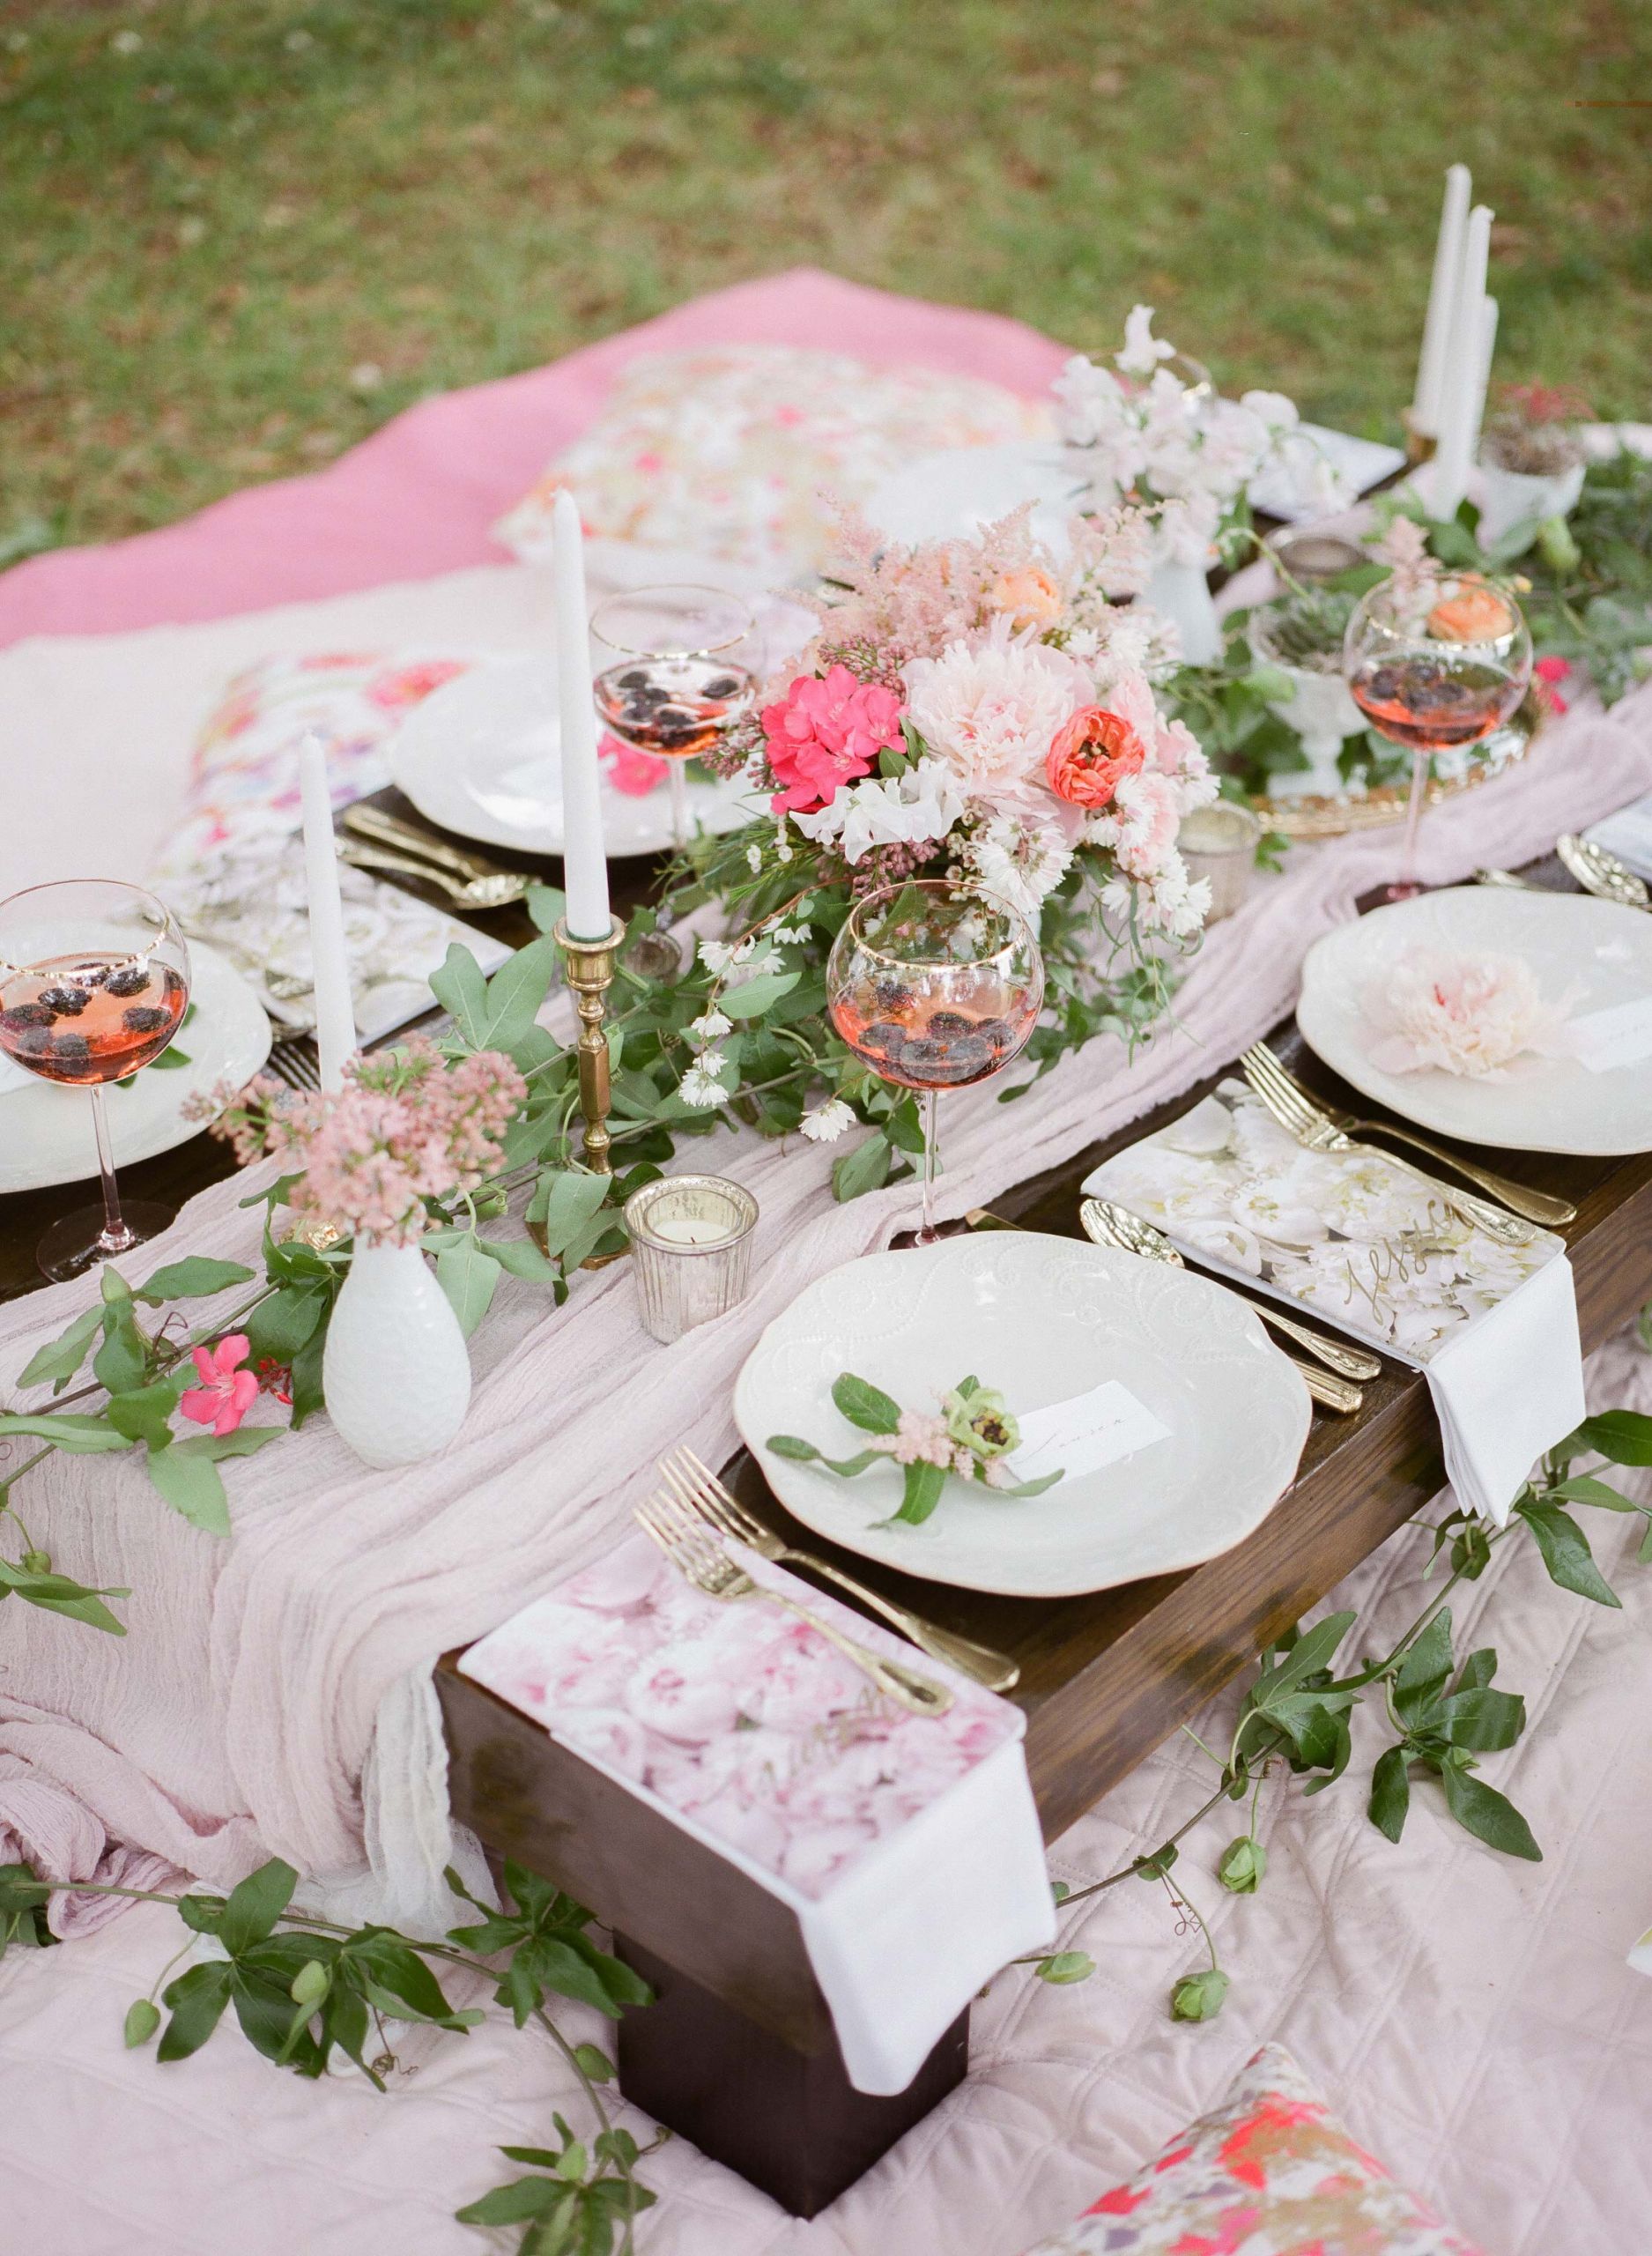 Themes For Wedding Showers
 24 Unexpected Bridal Shower Ideas to Bookmark